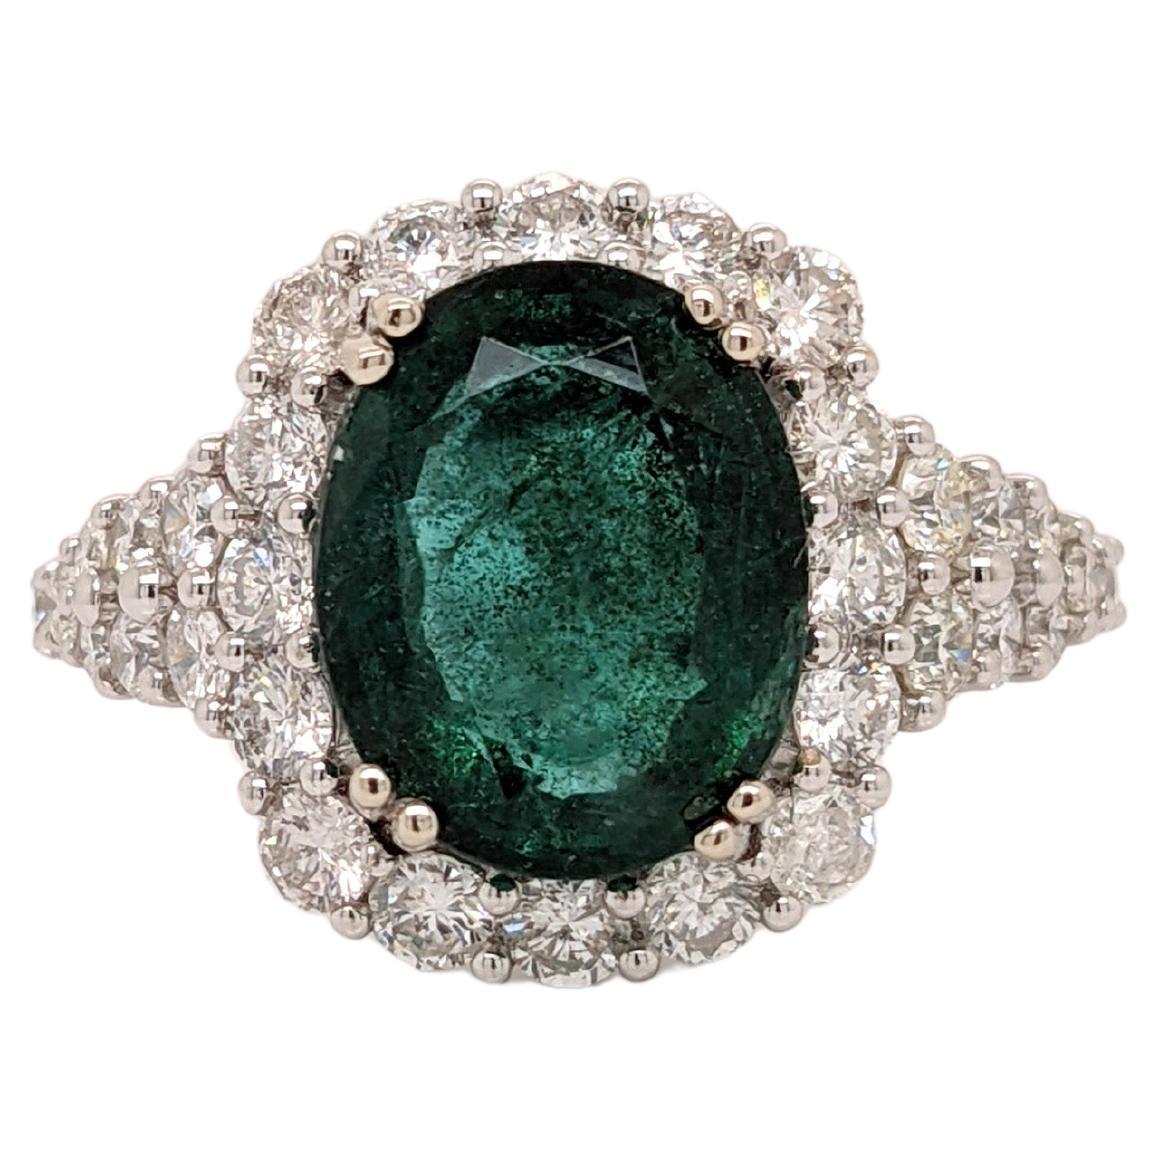 3 Carat Emerald Ring in 14k Solid White Gold with a Halo of Natural Diamonds